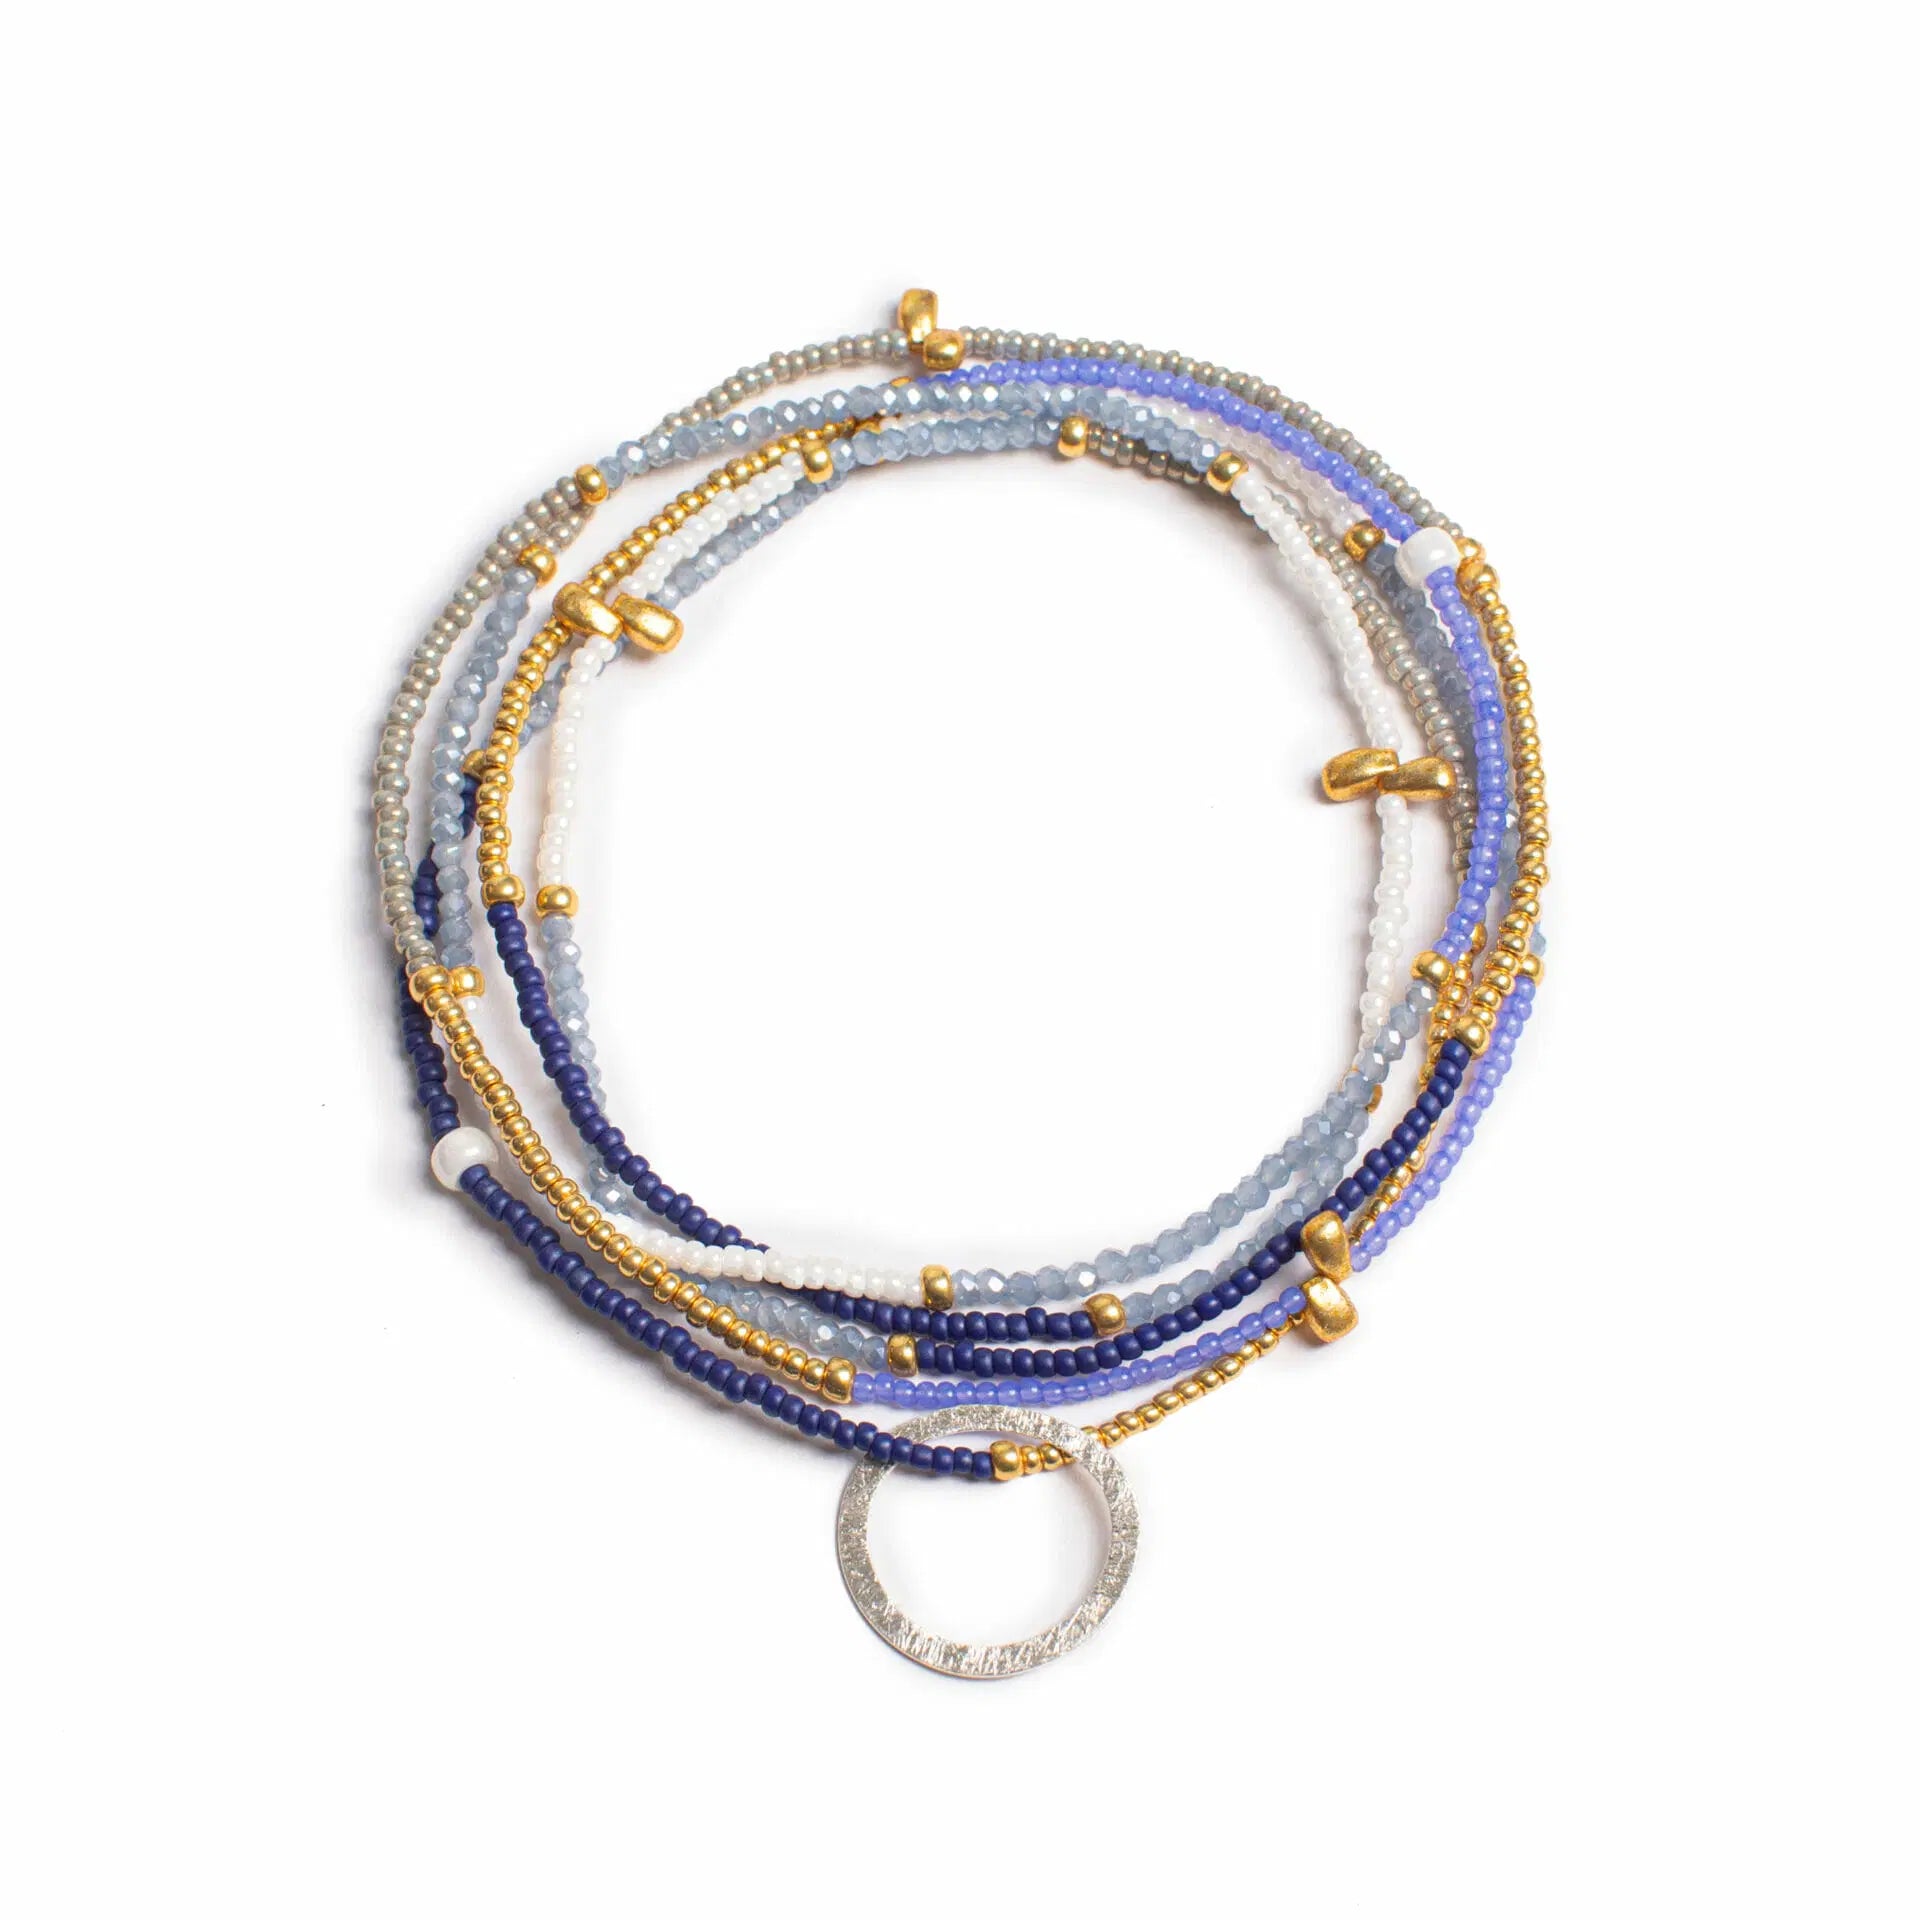 THE MAKERY HEART STRING NECKLACE IN NAVY AND LAVENDER